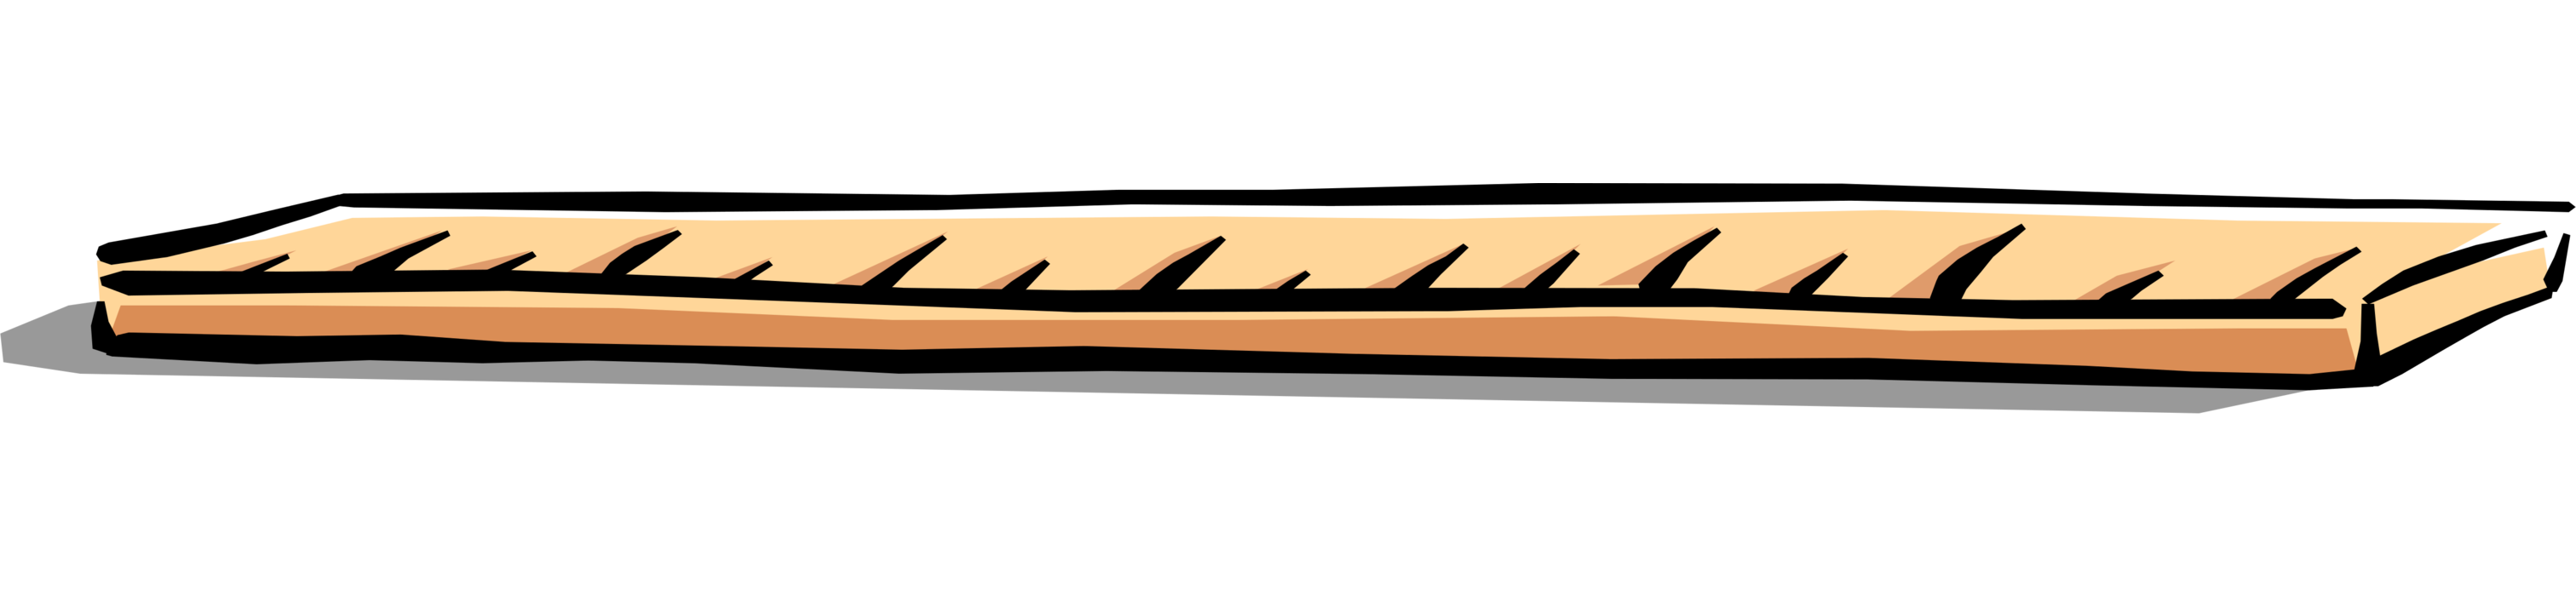 Vector Illustration of Ruler, Rule or Line Gauge Straight Edge Draws Lines and Measures Distances